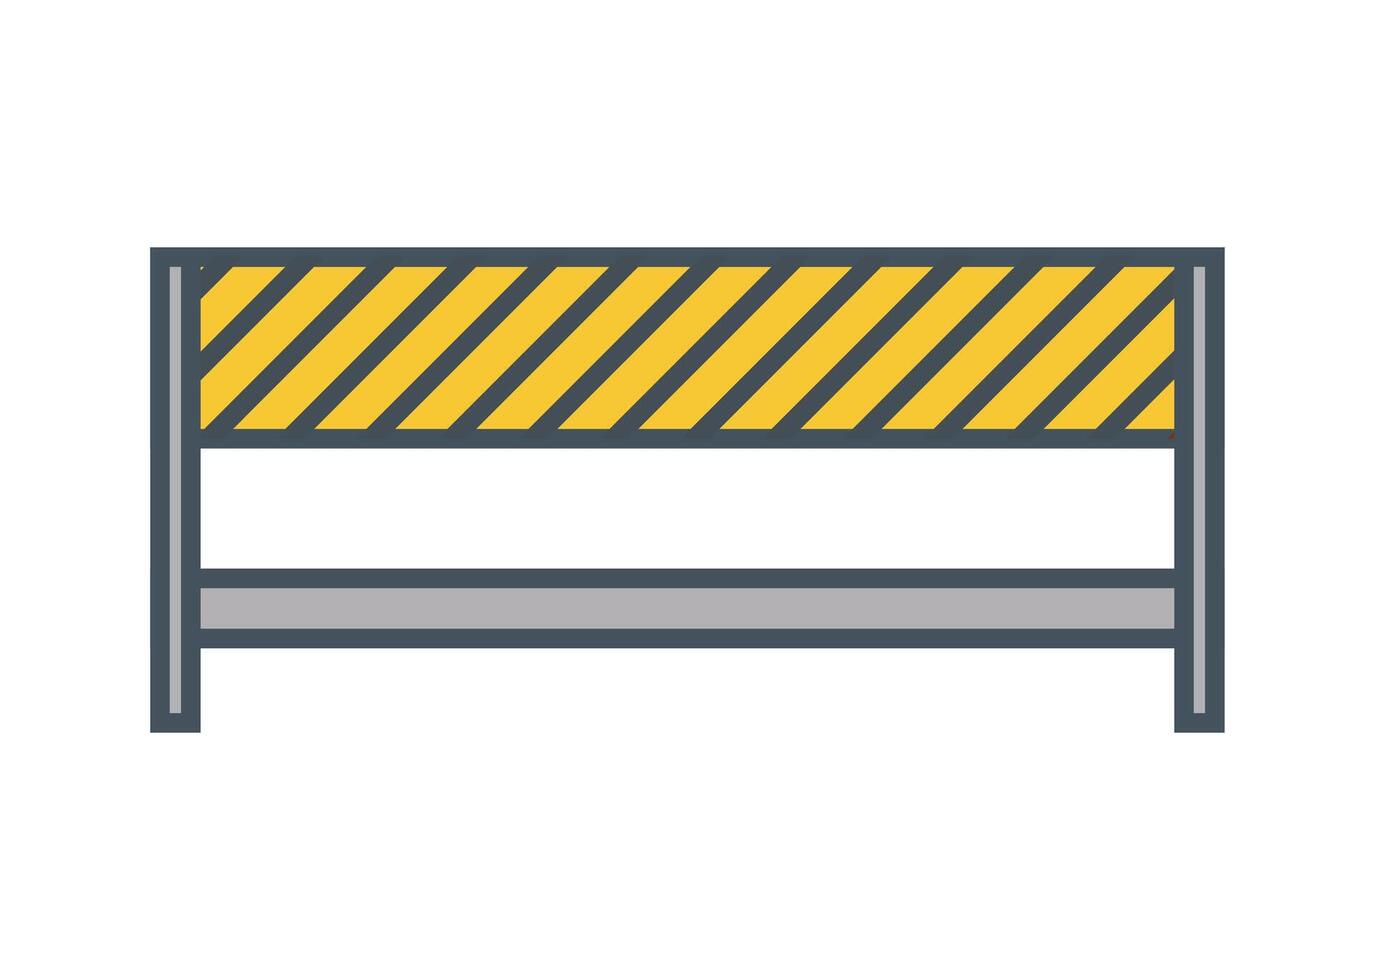 Striped Traffic Barrier Icon vector